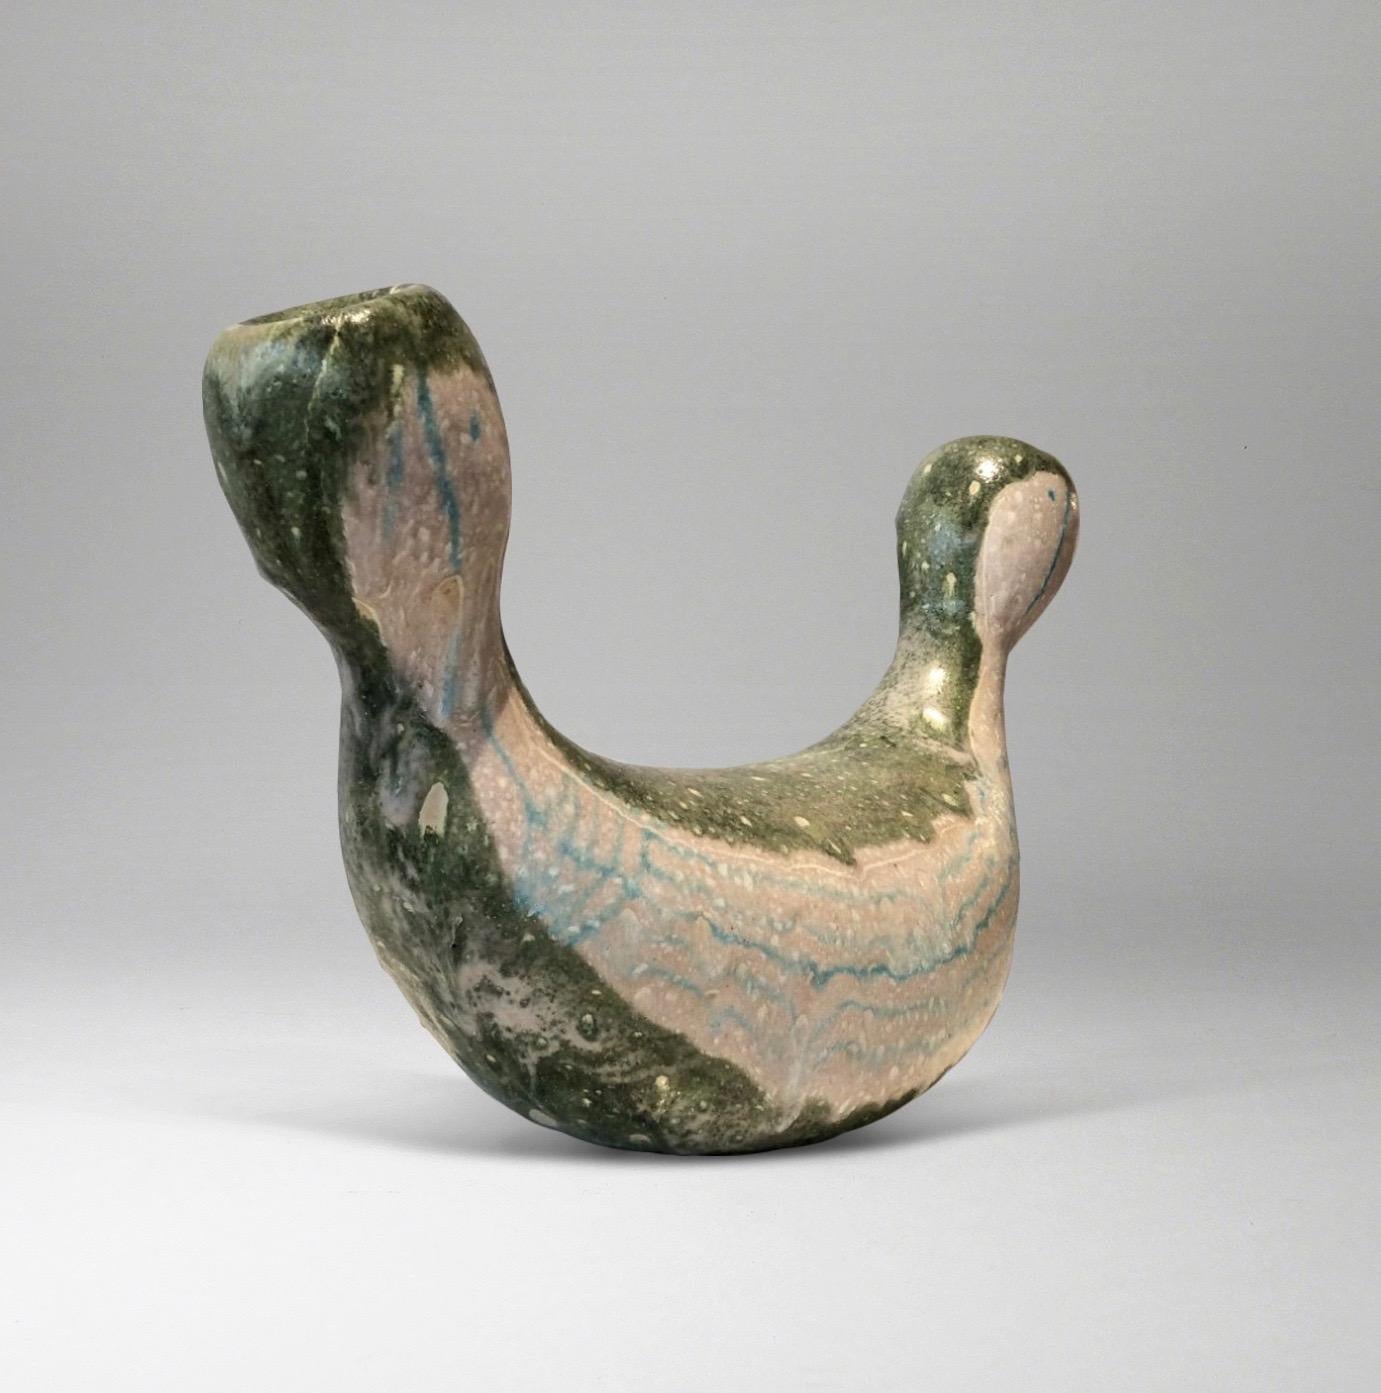 Rare and exceptional sculpture in sage green, turquoise, and ivory glazed ceramic. The curved form - unusual in Gambone's known works - terminates in faces sketched in turquoise (front and back). 
Glazed signature 'GAMBONE ITALY' with donkey symbol